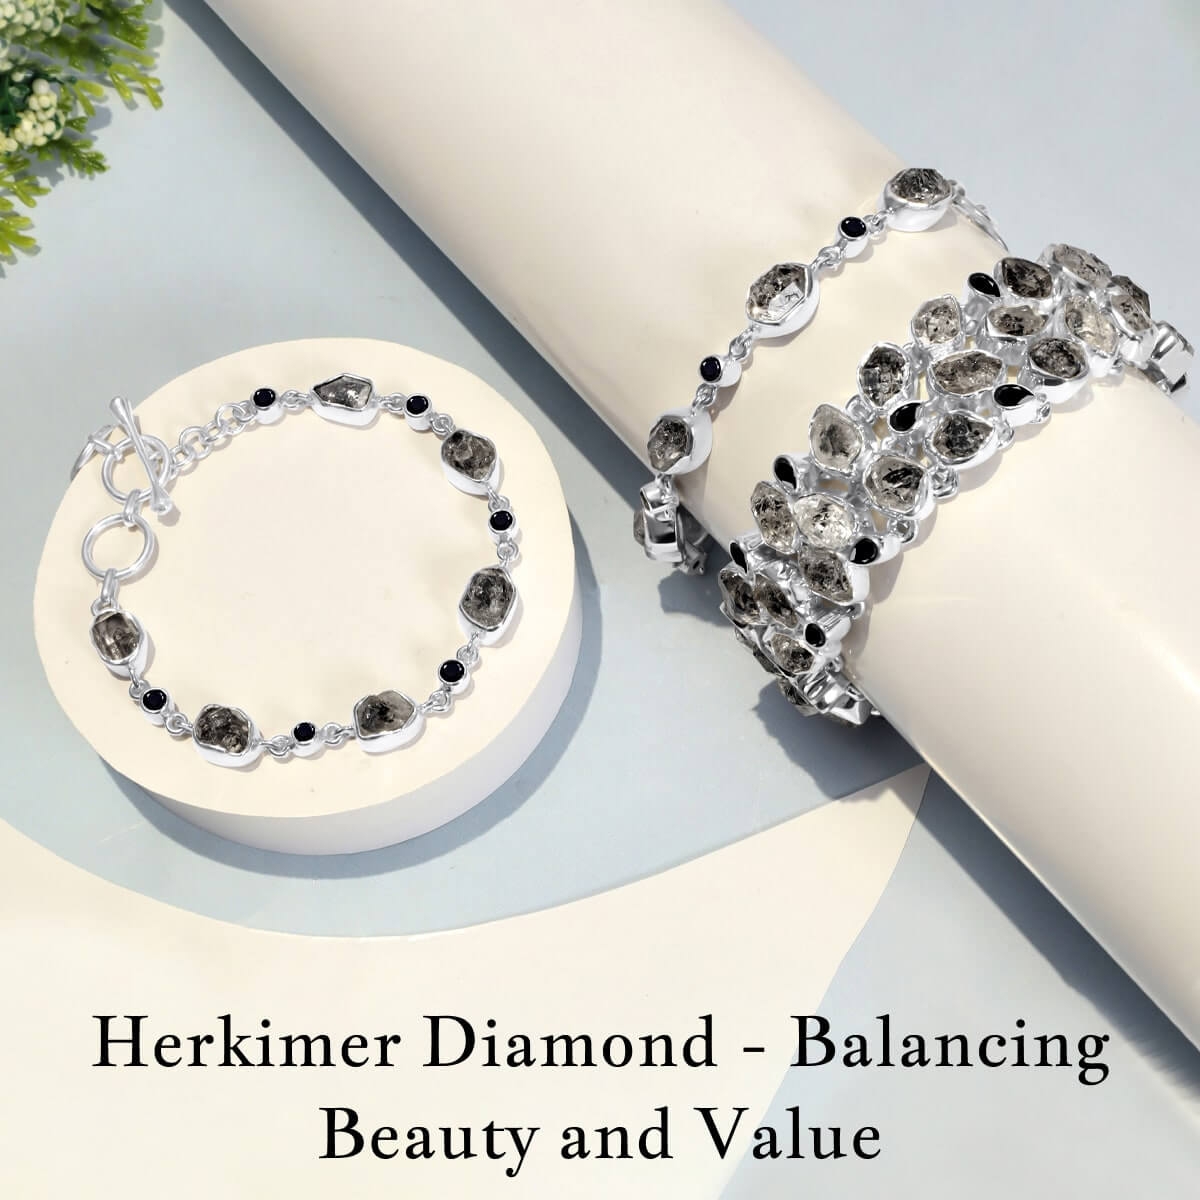 Cost and Value of Herkimer Diamond